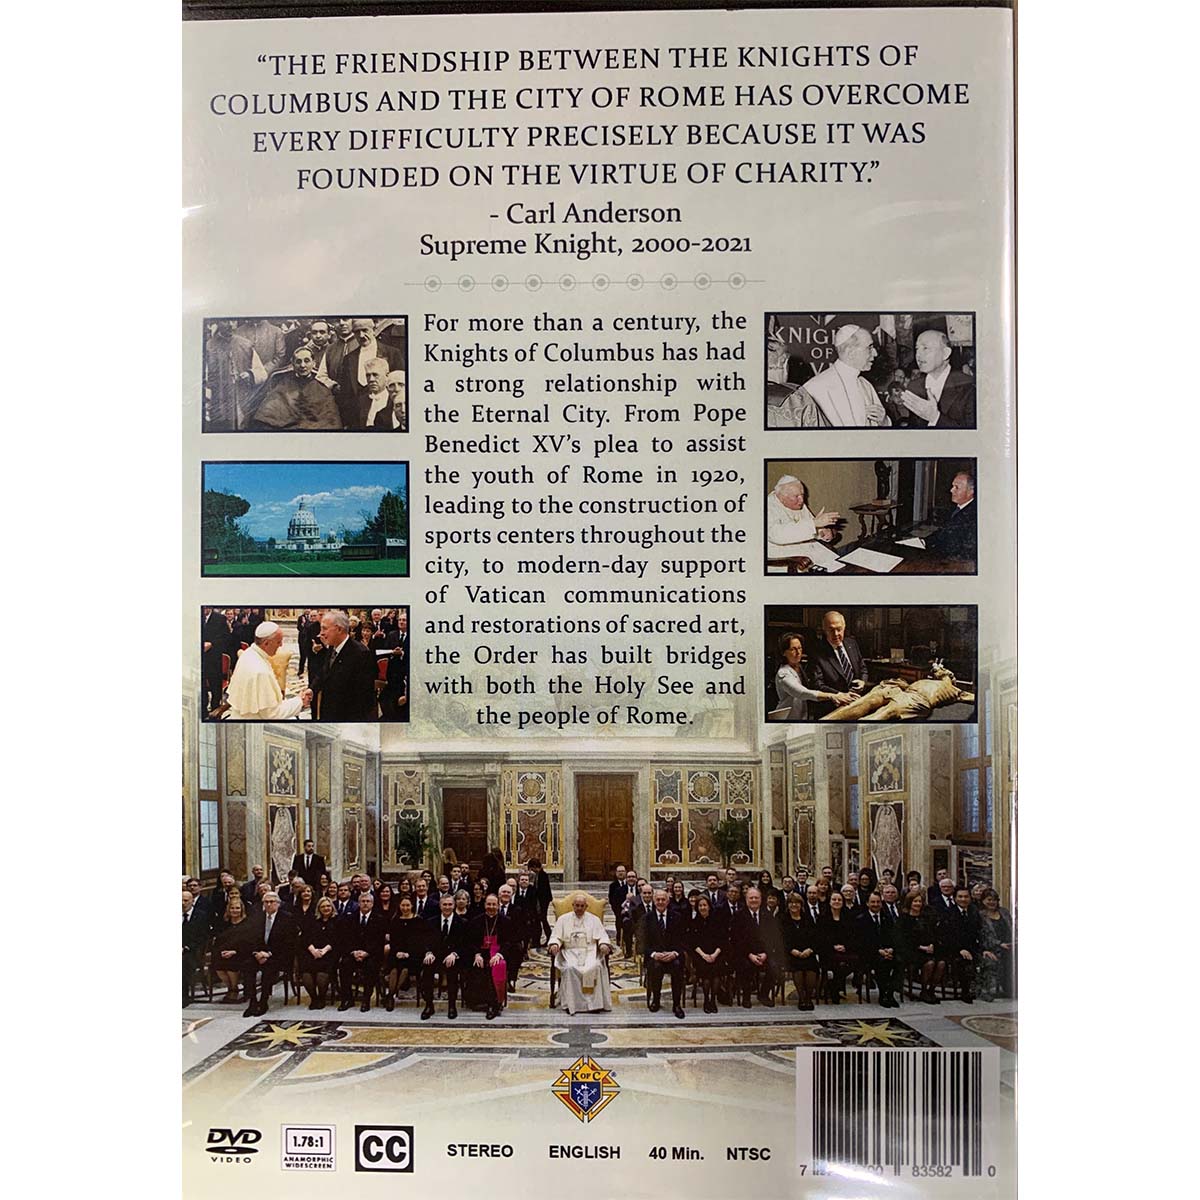 A Century of Hope: The Knights of Columbus in Rome DVD